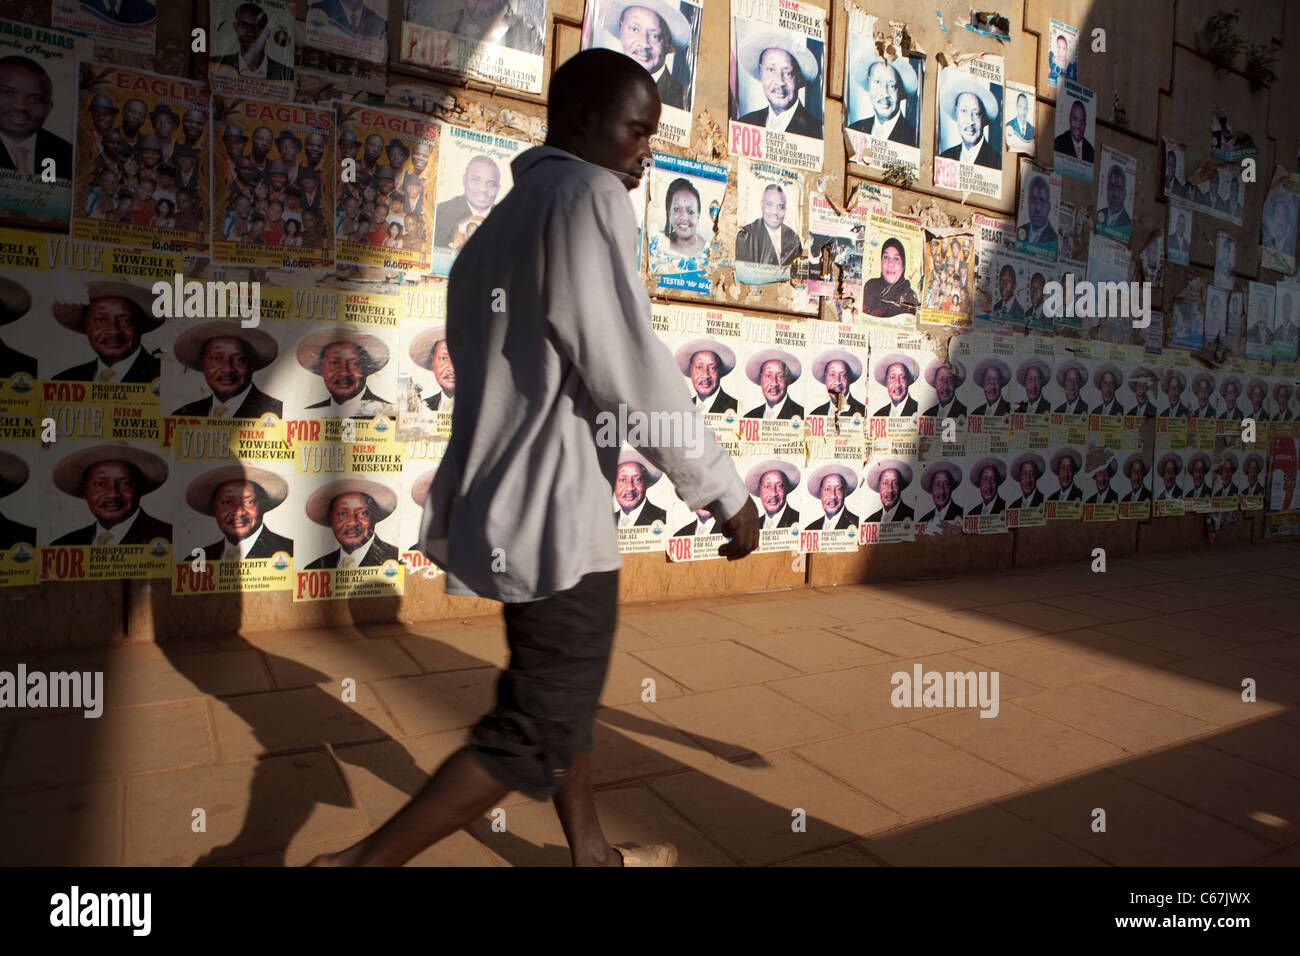 A pedestrian walks past election campaign posters in Kampala, Uganda, East Africa Stock Photo